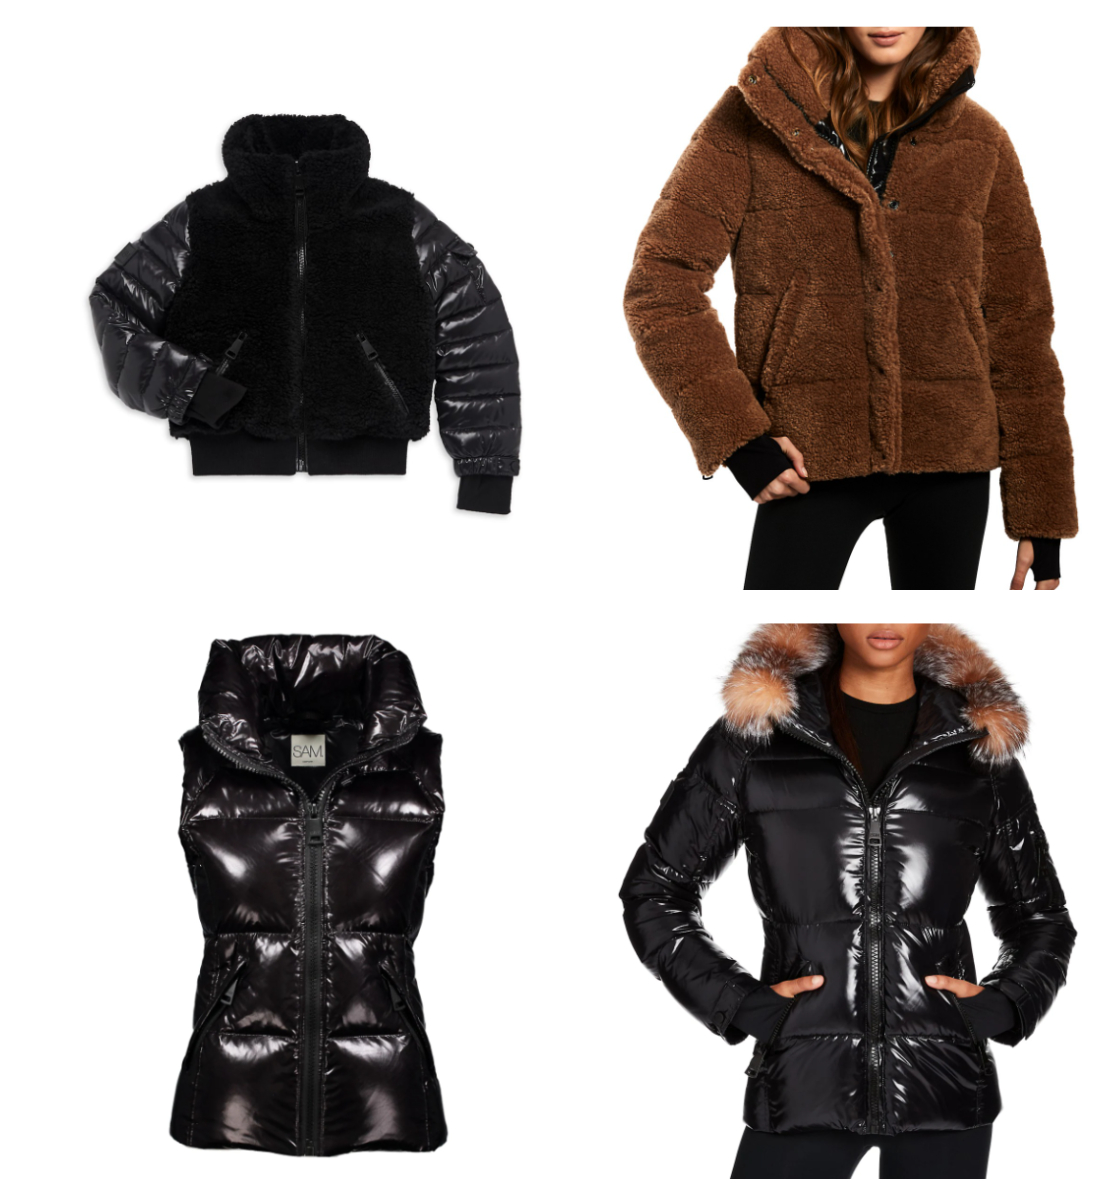 Saks Fifth Ave: Sam. Women’s and Girls Coats from $112.50 | Dollar Savers